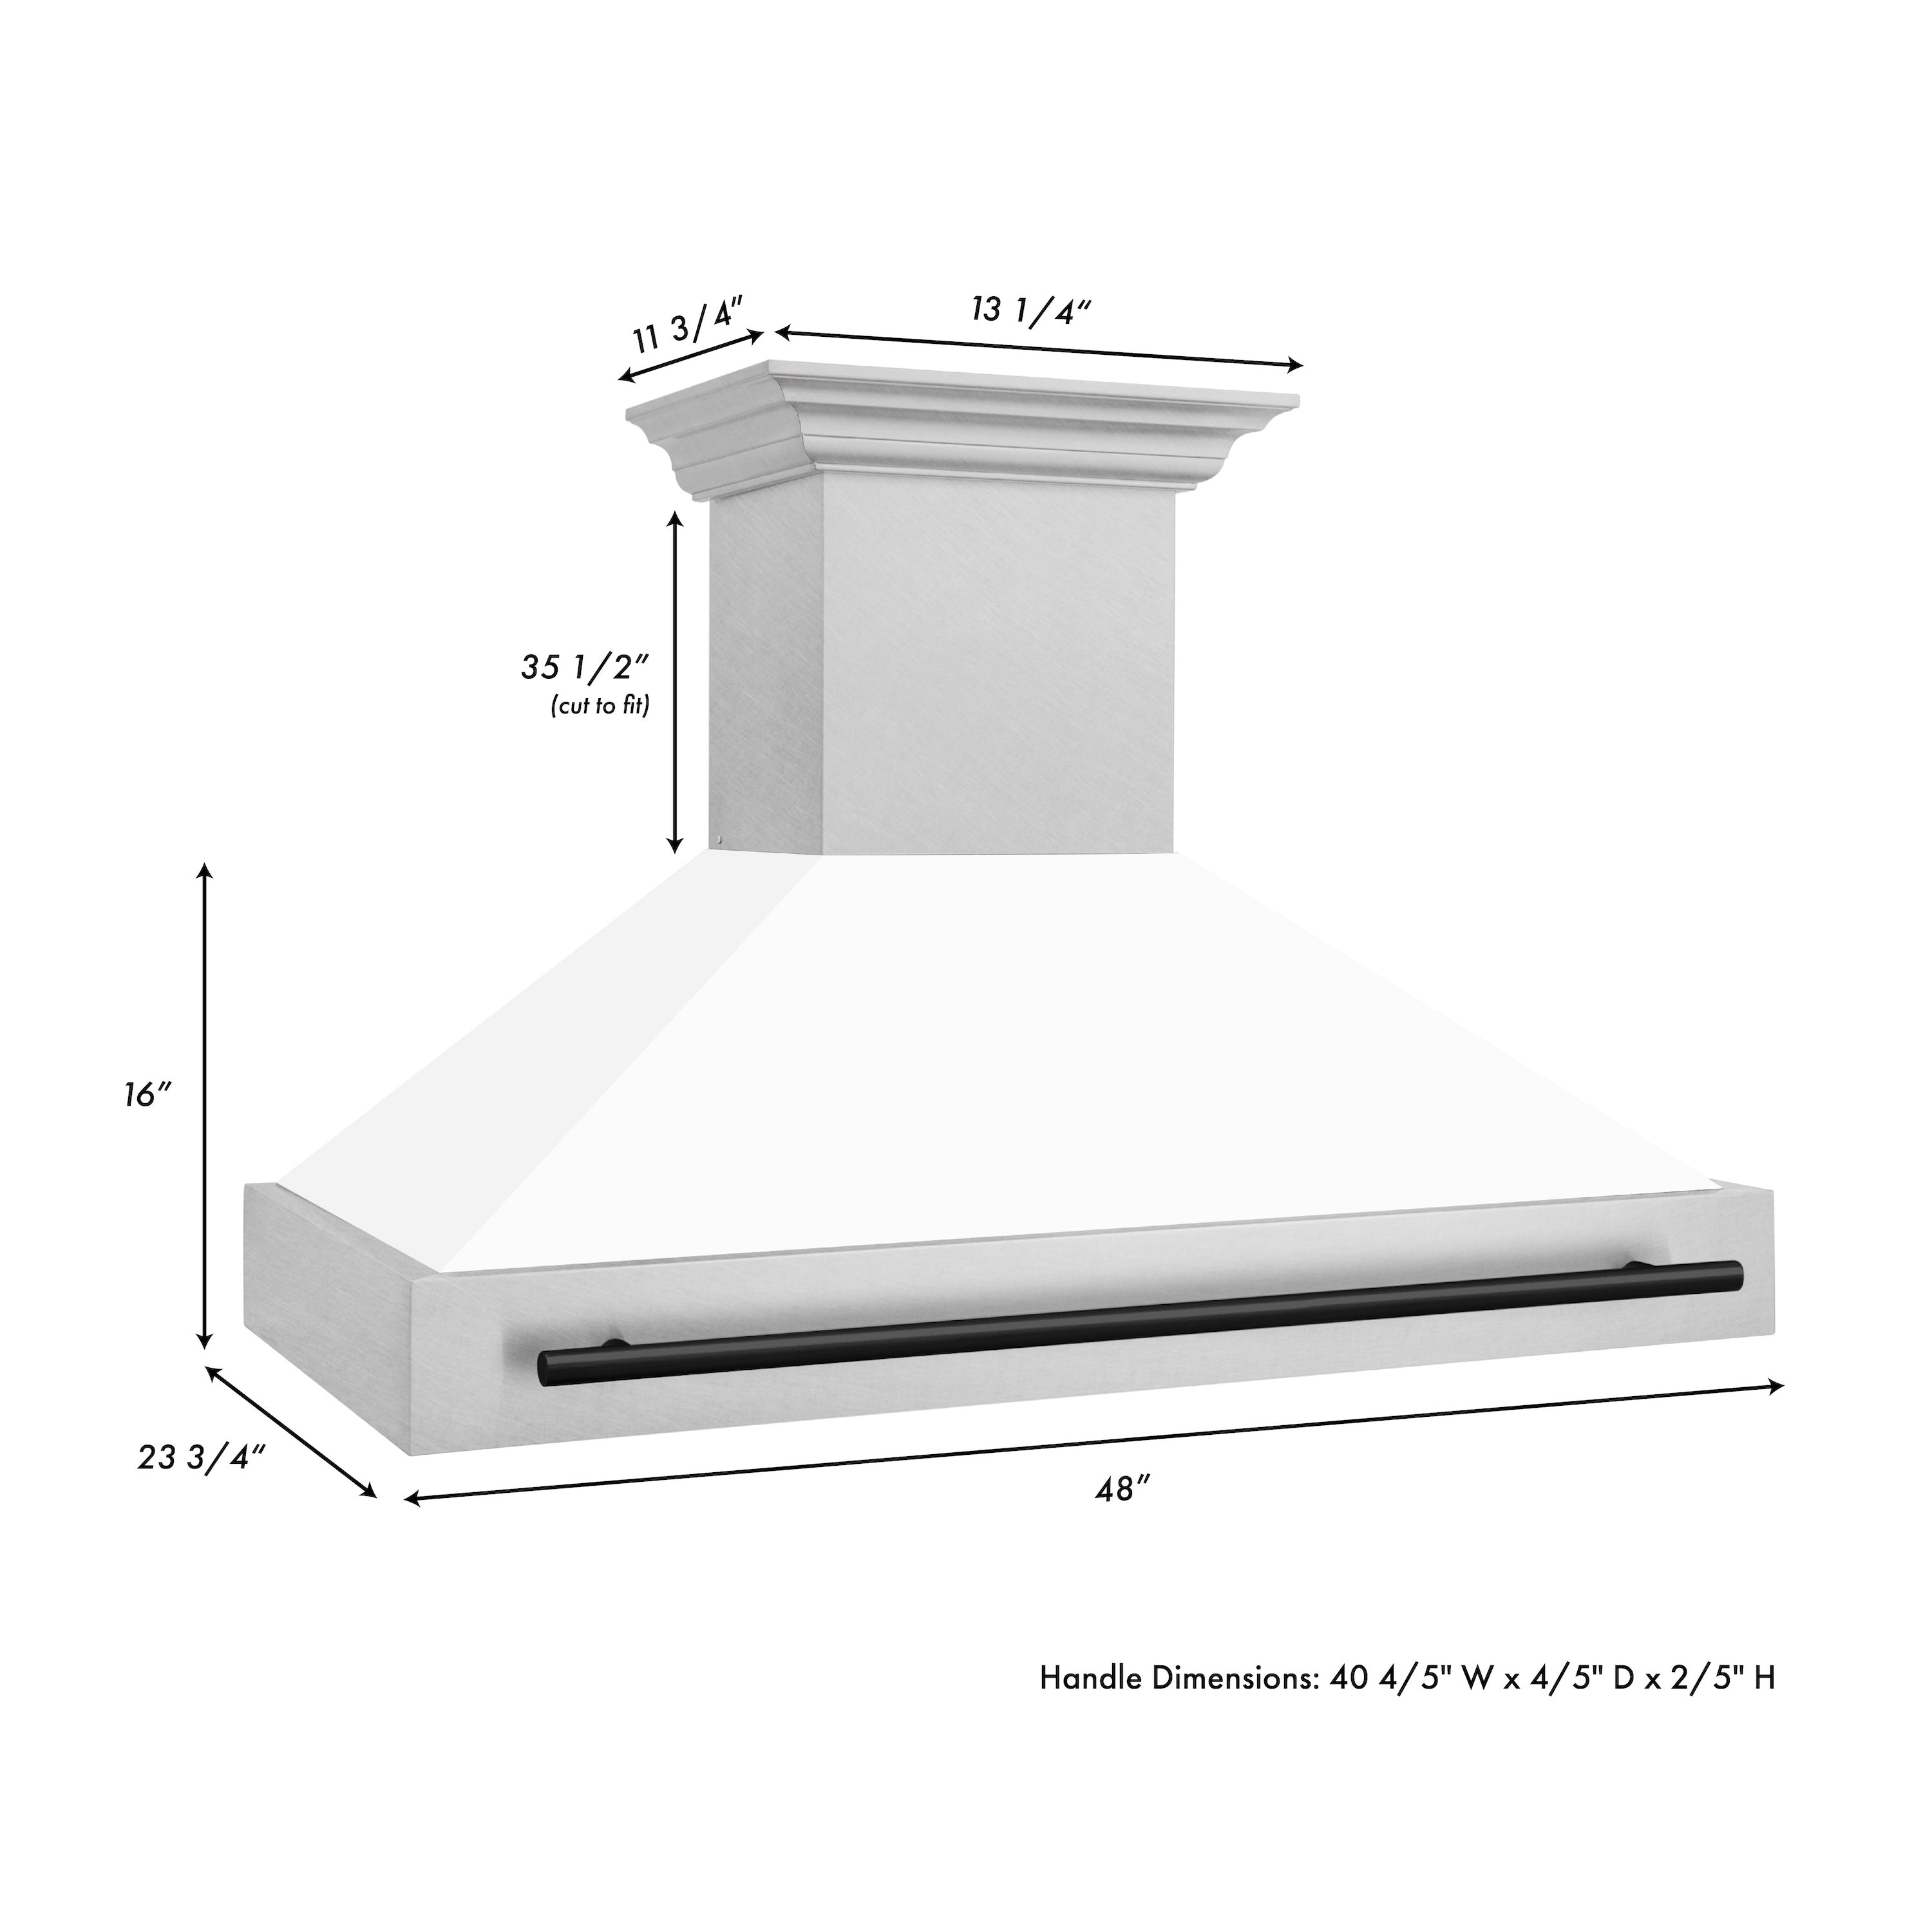 ZLINE Autograph Edition 48 in. Fingerprint Resistant Stainless Steel Range Hood with White Matte Shell and Accented Handle (8654SNZ-WM48) dimensional diagram and measurements.